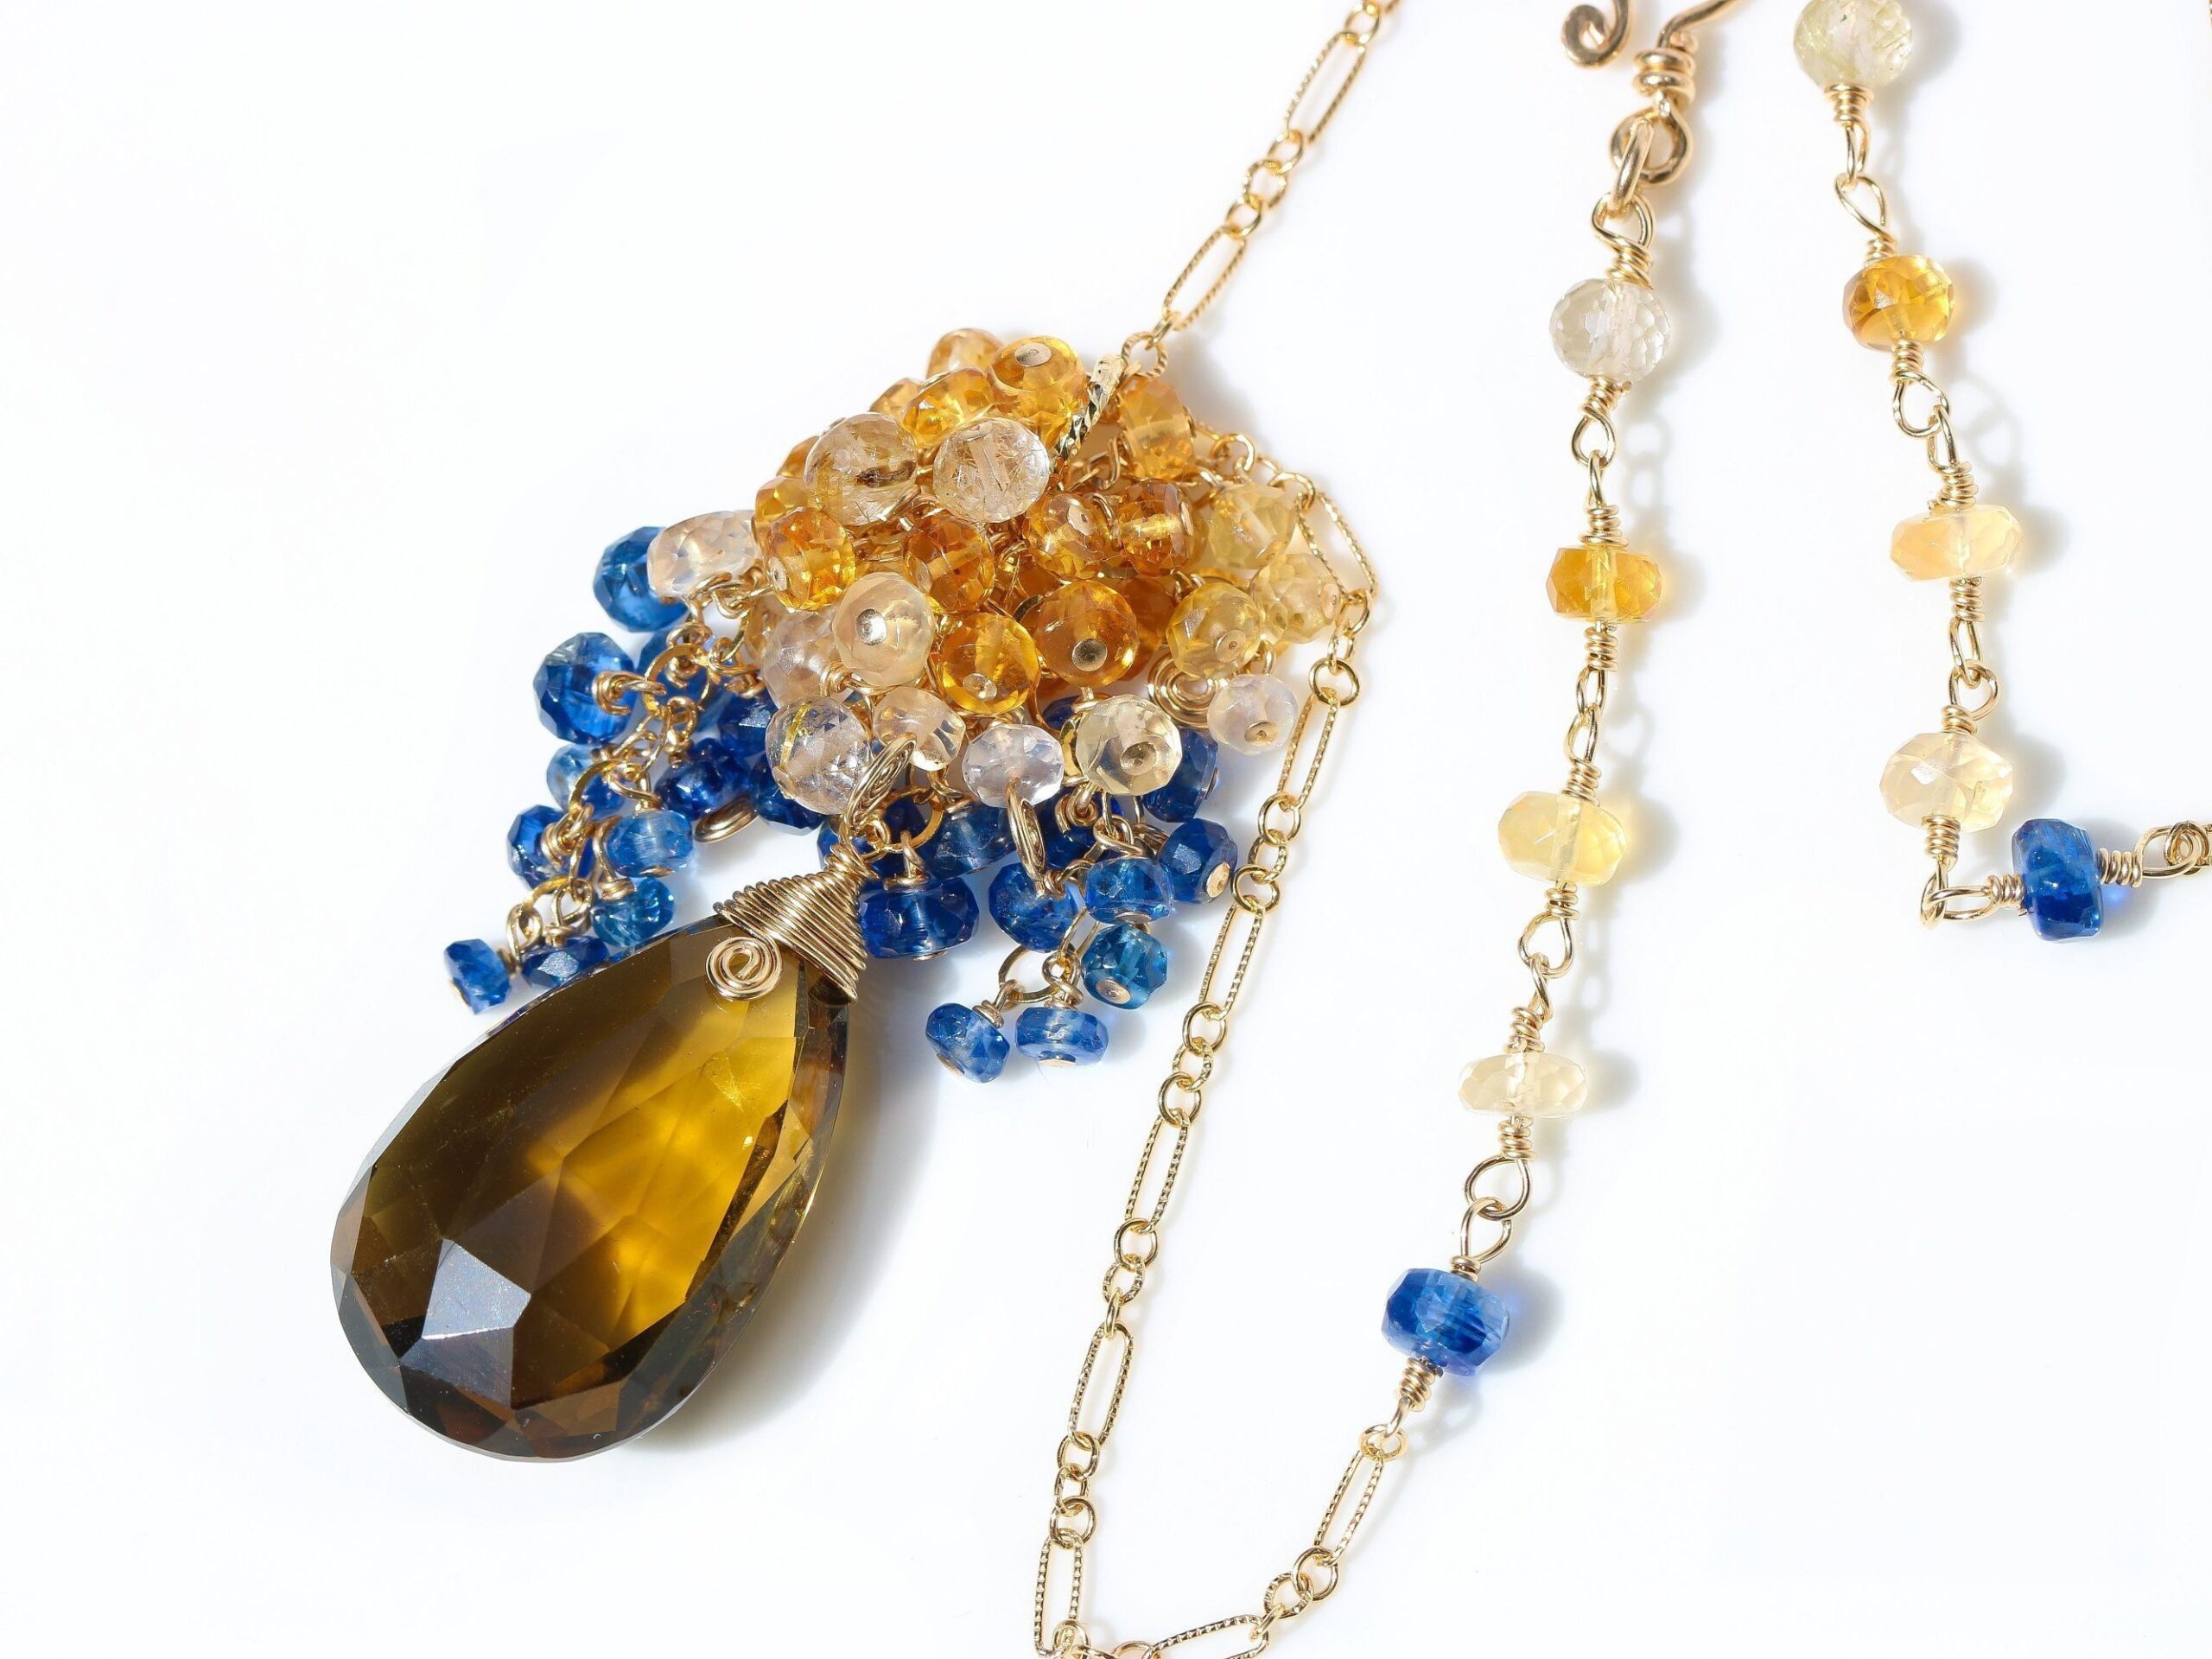 Rainbow Rutilated Quartz Rosary Necklace and Earring Set